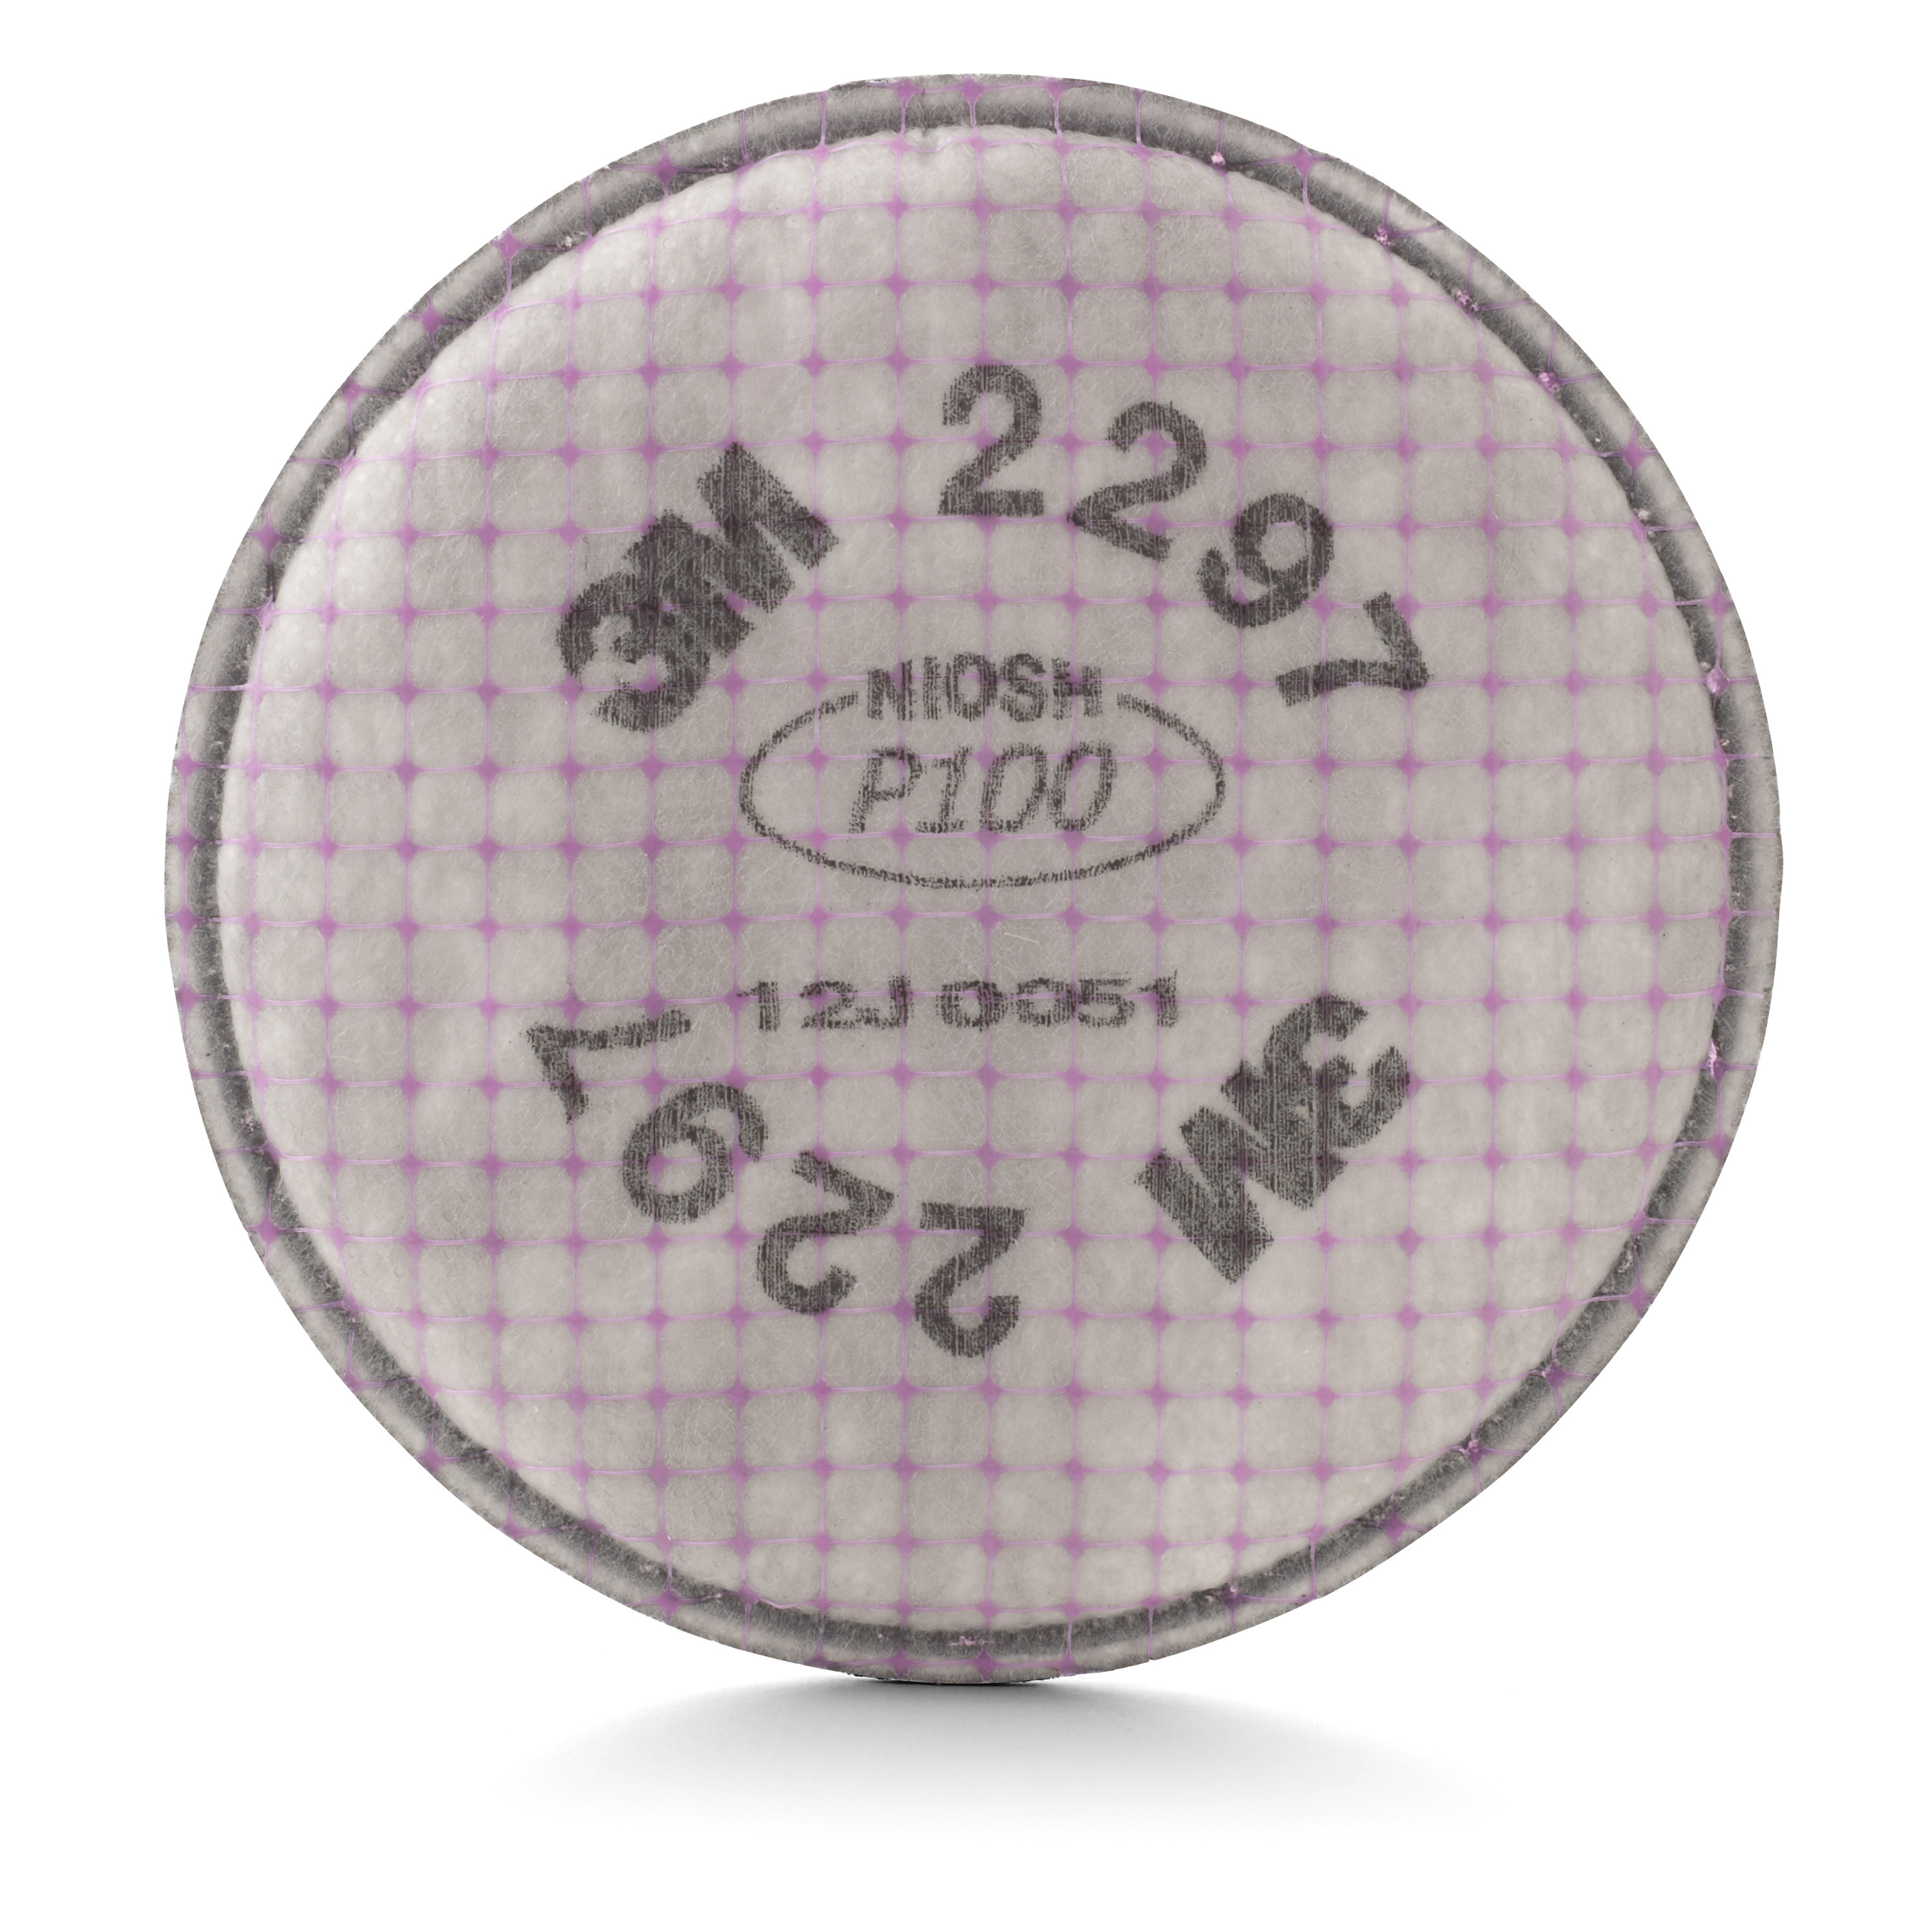 3M™ 051131-17172 2297 Particulate Filter, For Use With 3M™ 5000 and 6000 Series Reusable Respirators, P100 Filter Class, 0.9997 Filter Efficiency, Bayonet Connection, Magenta/Gray, Resists: Non-Oil Based Particulates and Nuisance Organic Vapors